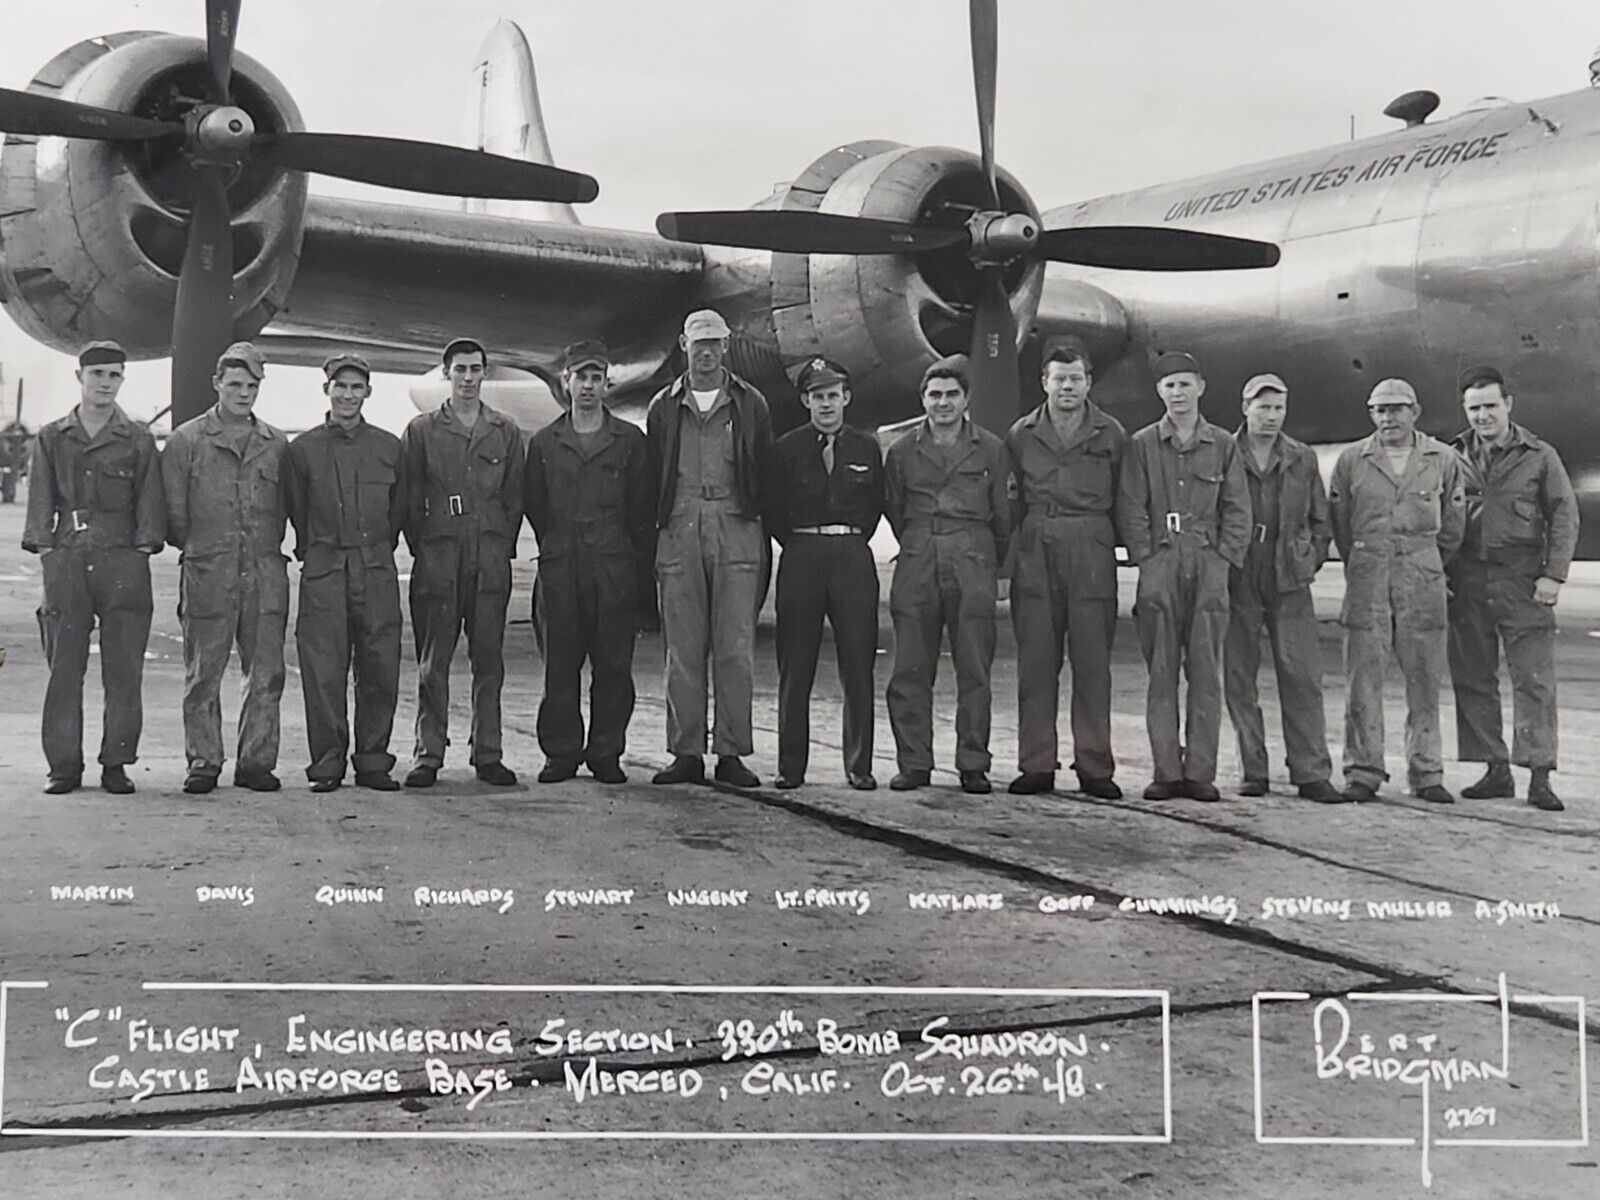 1948 USAF B-29 Flight Engineering Section 380th Bomb Squad Photo Castle AFB